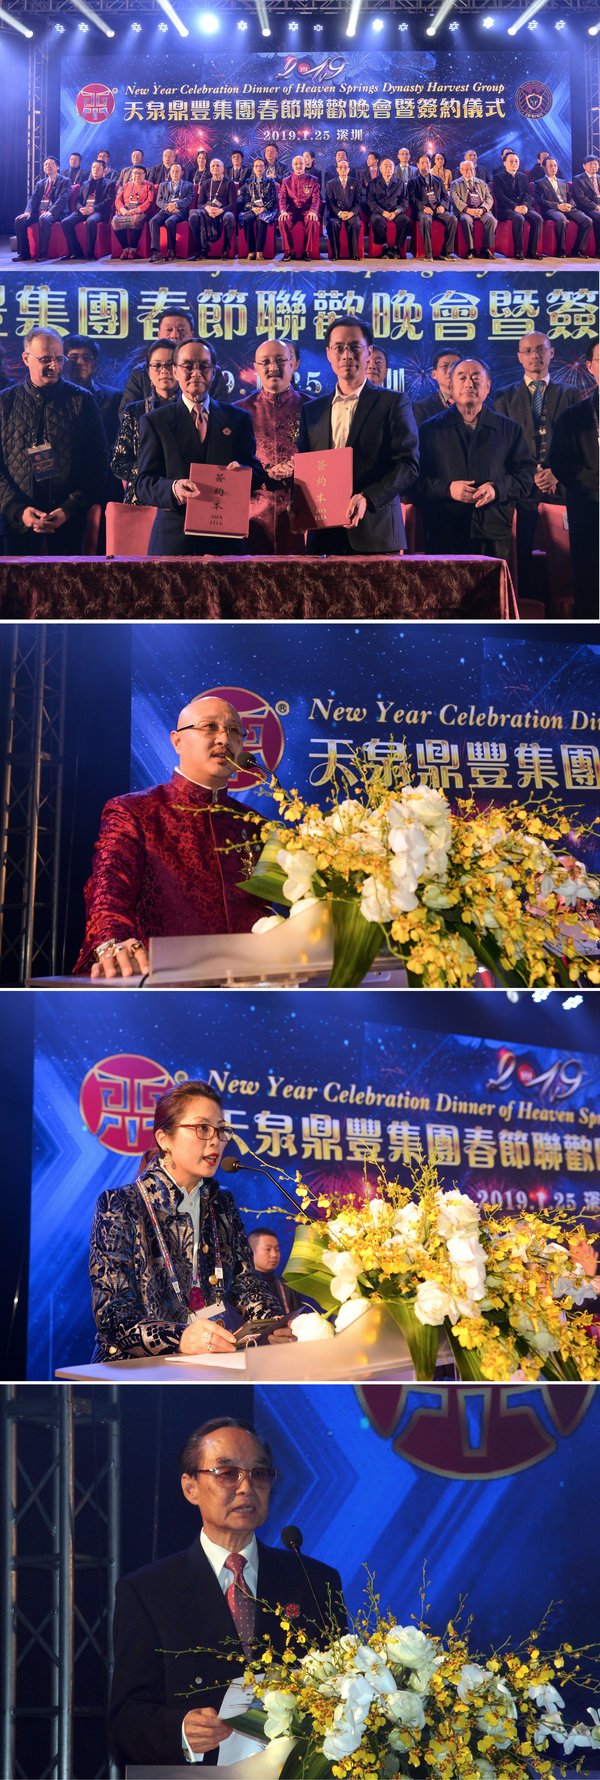 Figure 1: Group Photo of Heaven Springs Dynasty Harvest Spring Festival Gala Dinner and Signing Ceremony Officiating Guests.Figure 2: Signing Ceremony.Figure 3: Speech of Founder Dato’ Sri Prof. Ng Tat-yung .Figure 4: Speech of Chairman Datin Sri Dr. Irys Ng .Figure 5: Speech of Vice-Chairman Miao Geng-shu